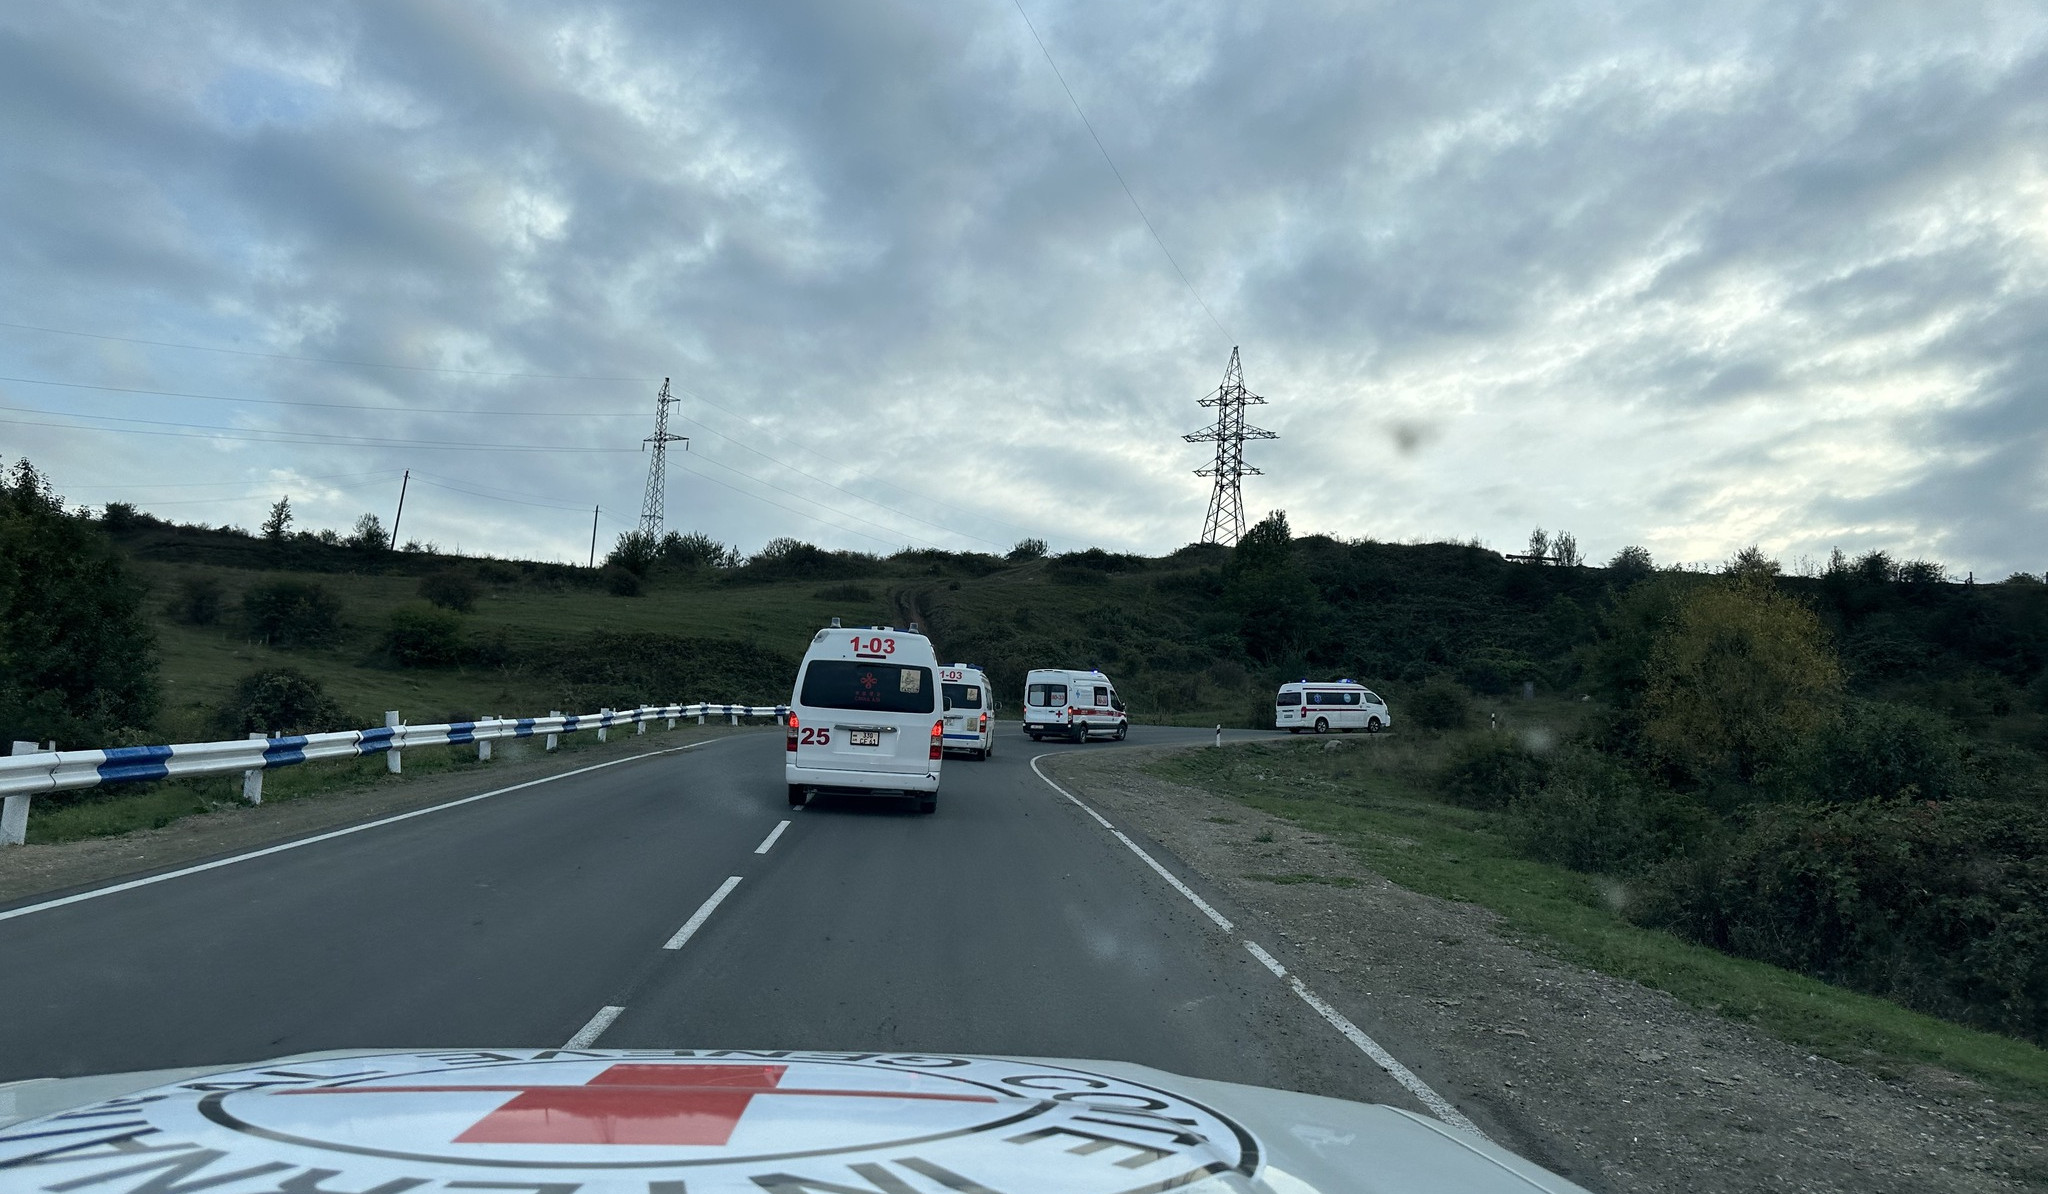 In September-October, 124 wounded and patients were transferred from Nagorno-Karabakh to Armenia: ICRC